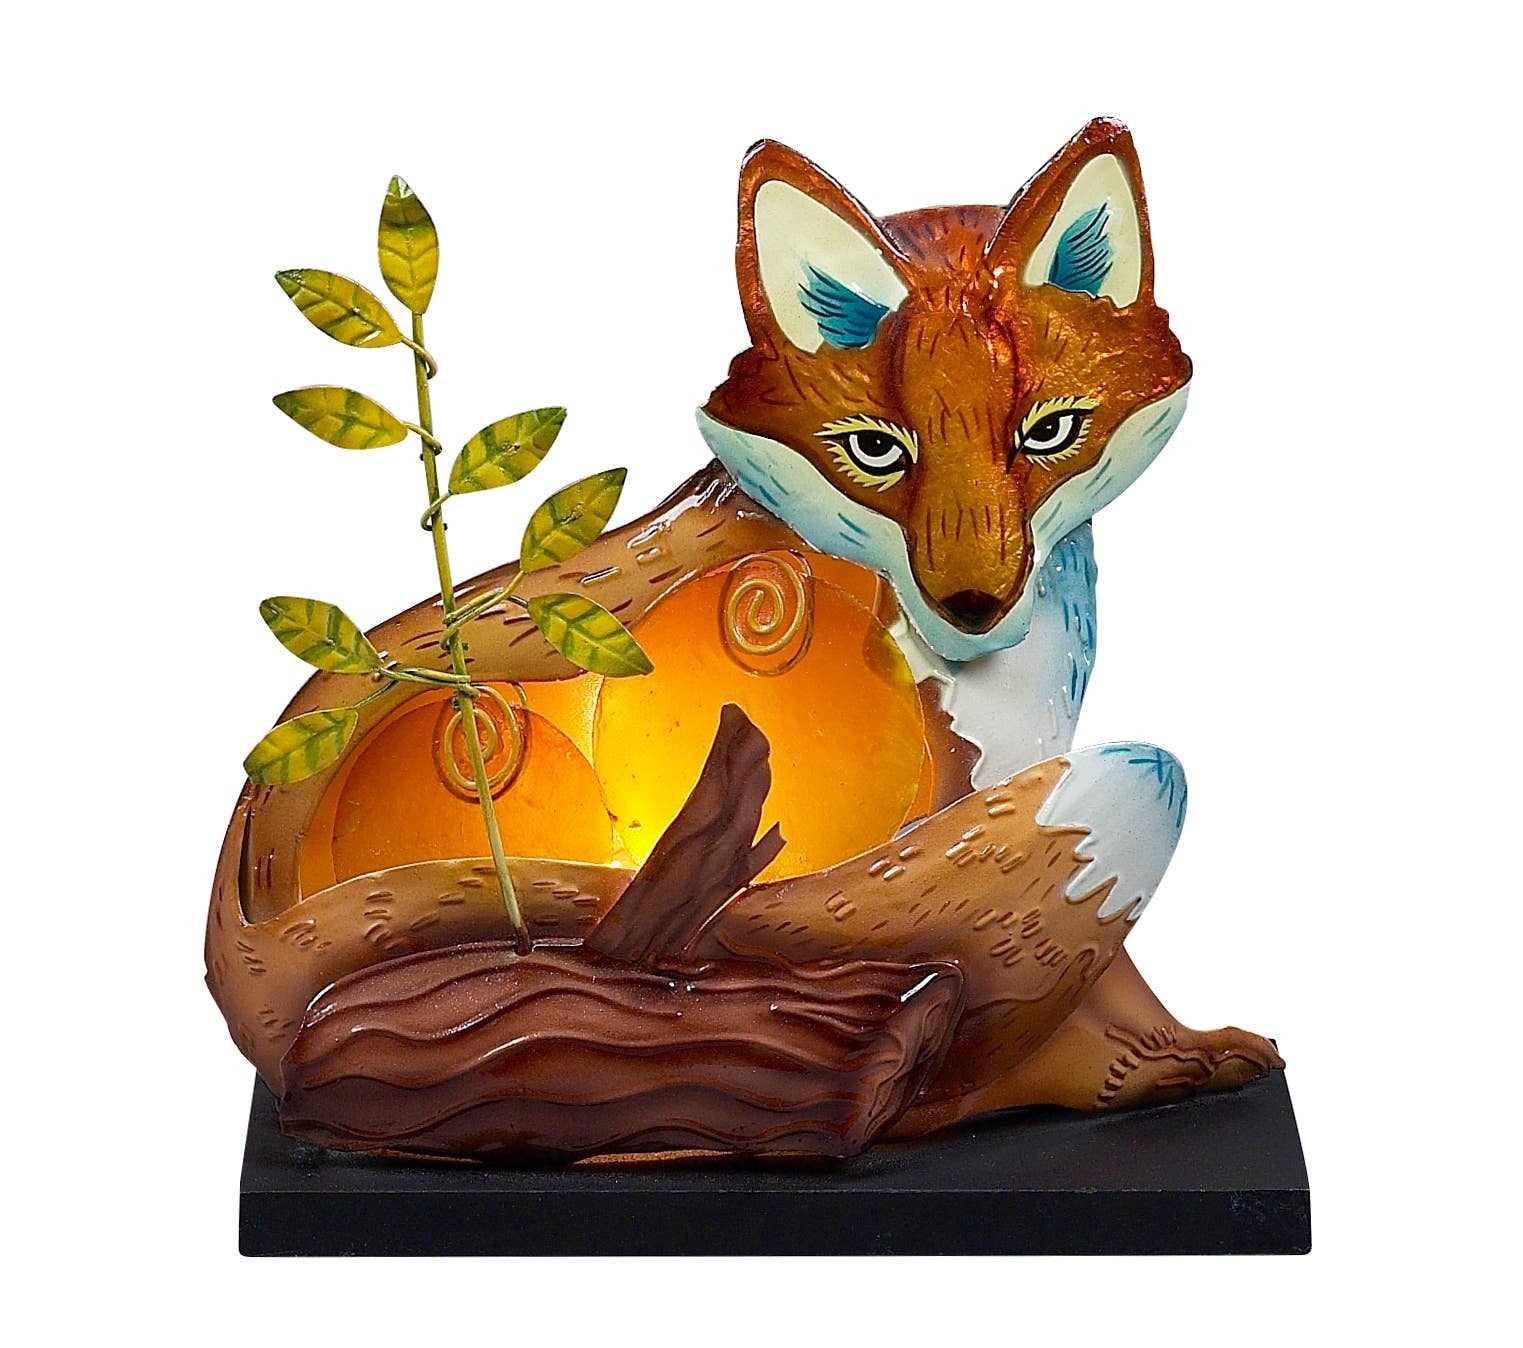 Accent lamp in the shape of a fox hiding behind a log and twig.